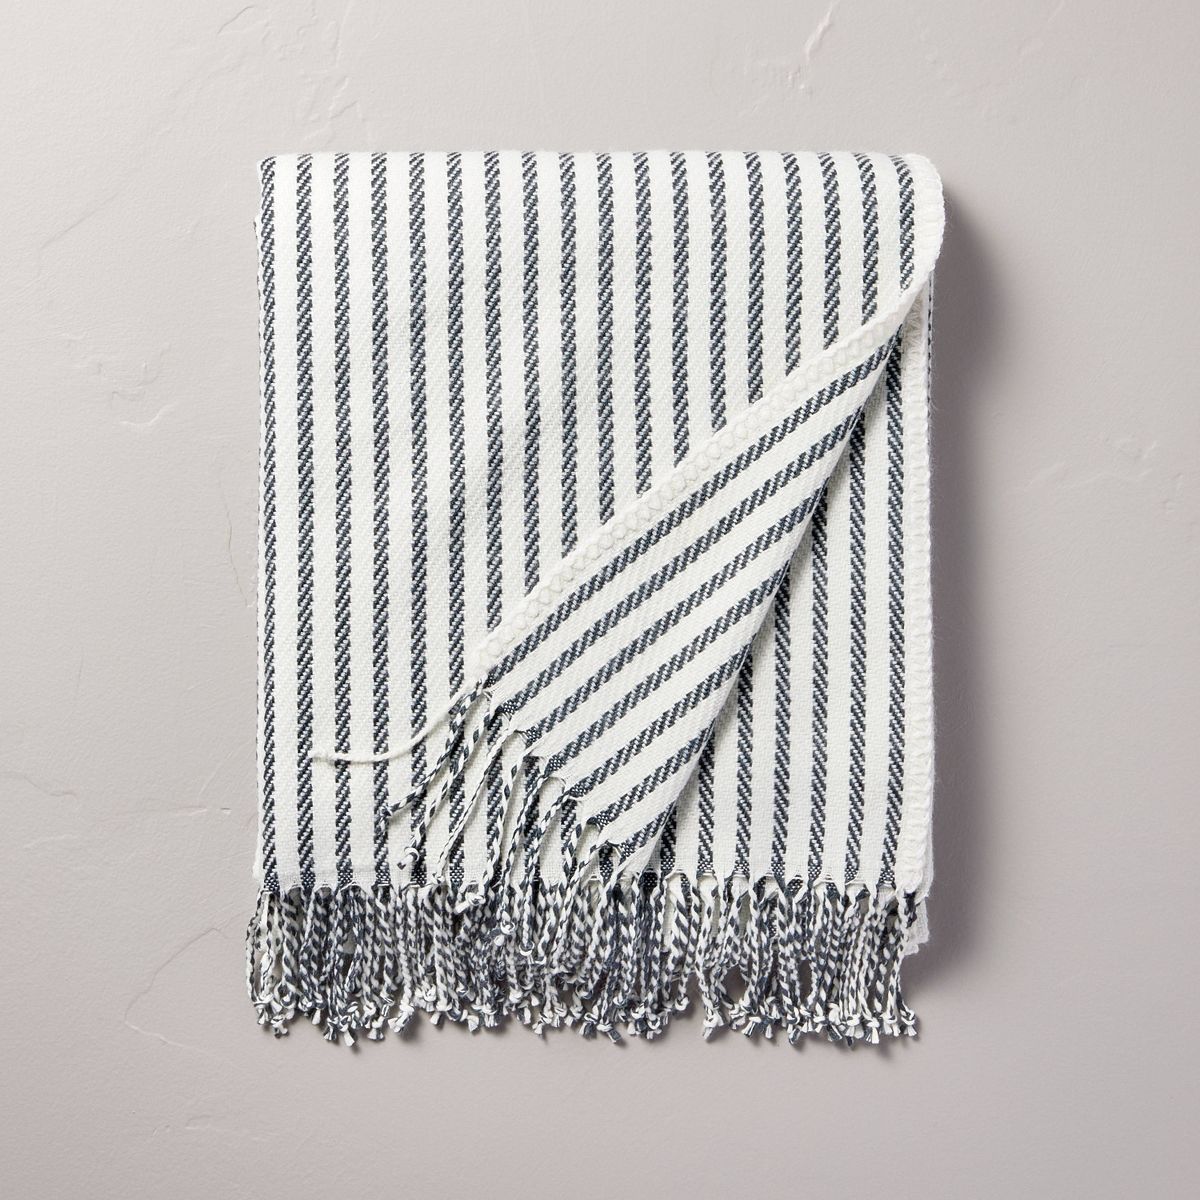 Ticking Stripe Woven Throw Blanket Gray/Cream - Hearth & Hand™ with Magnolia | Target